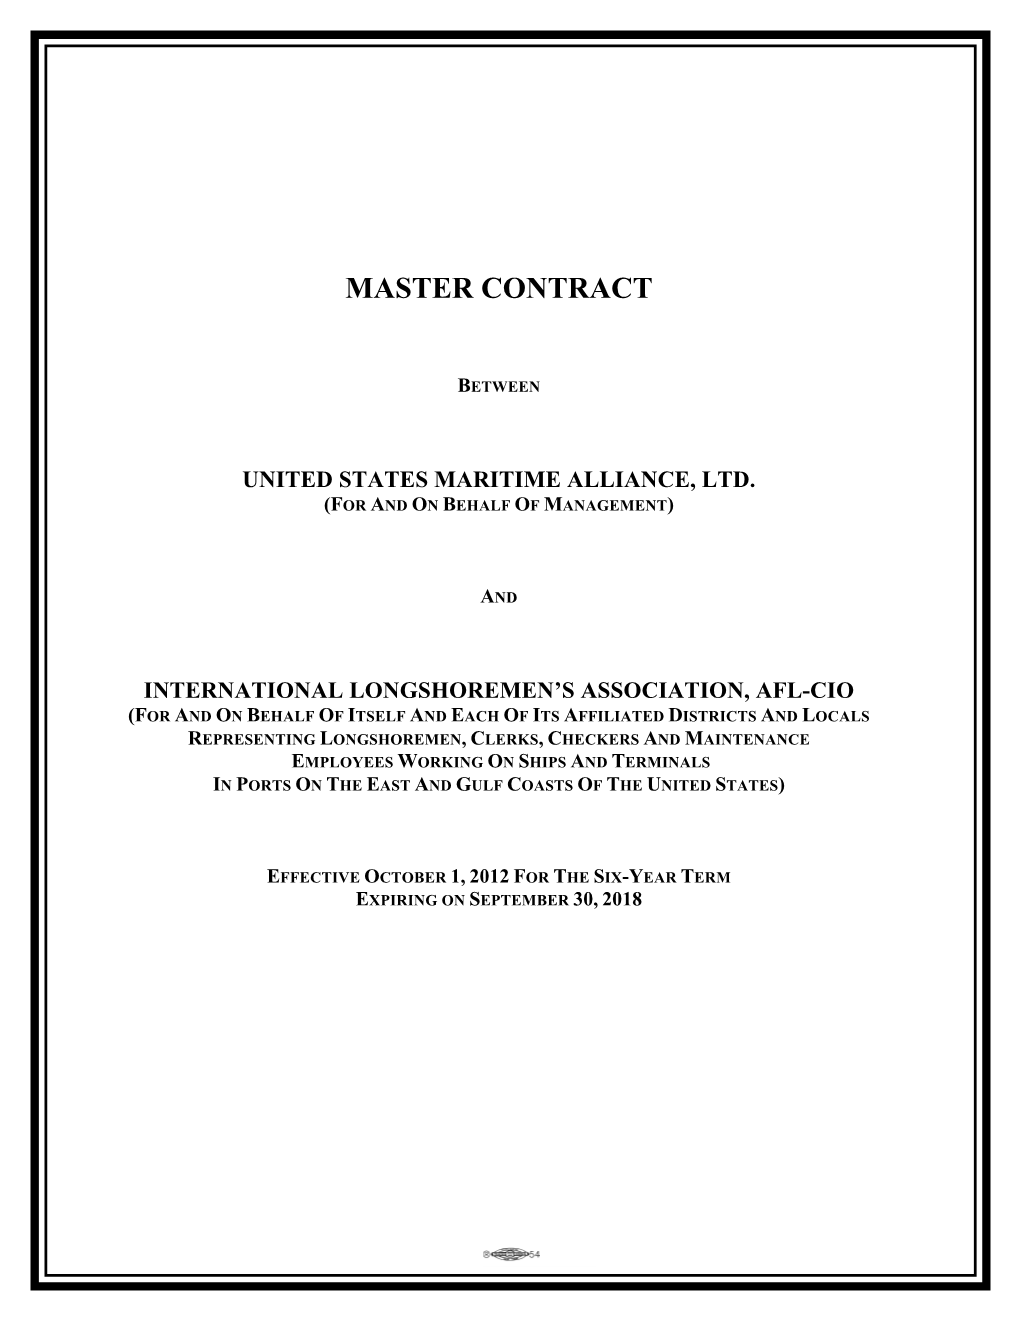 Revisions to 2012-2018 Master Contract W/O Red-Lining 6/16/14